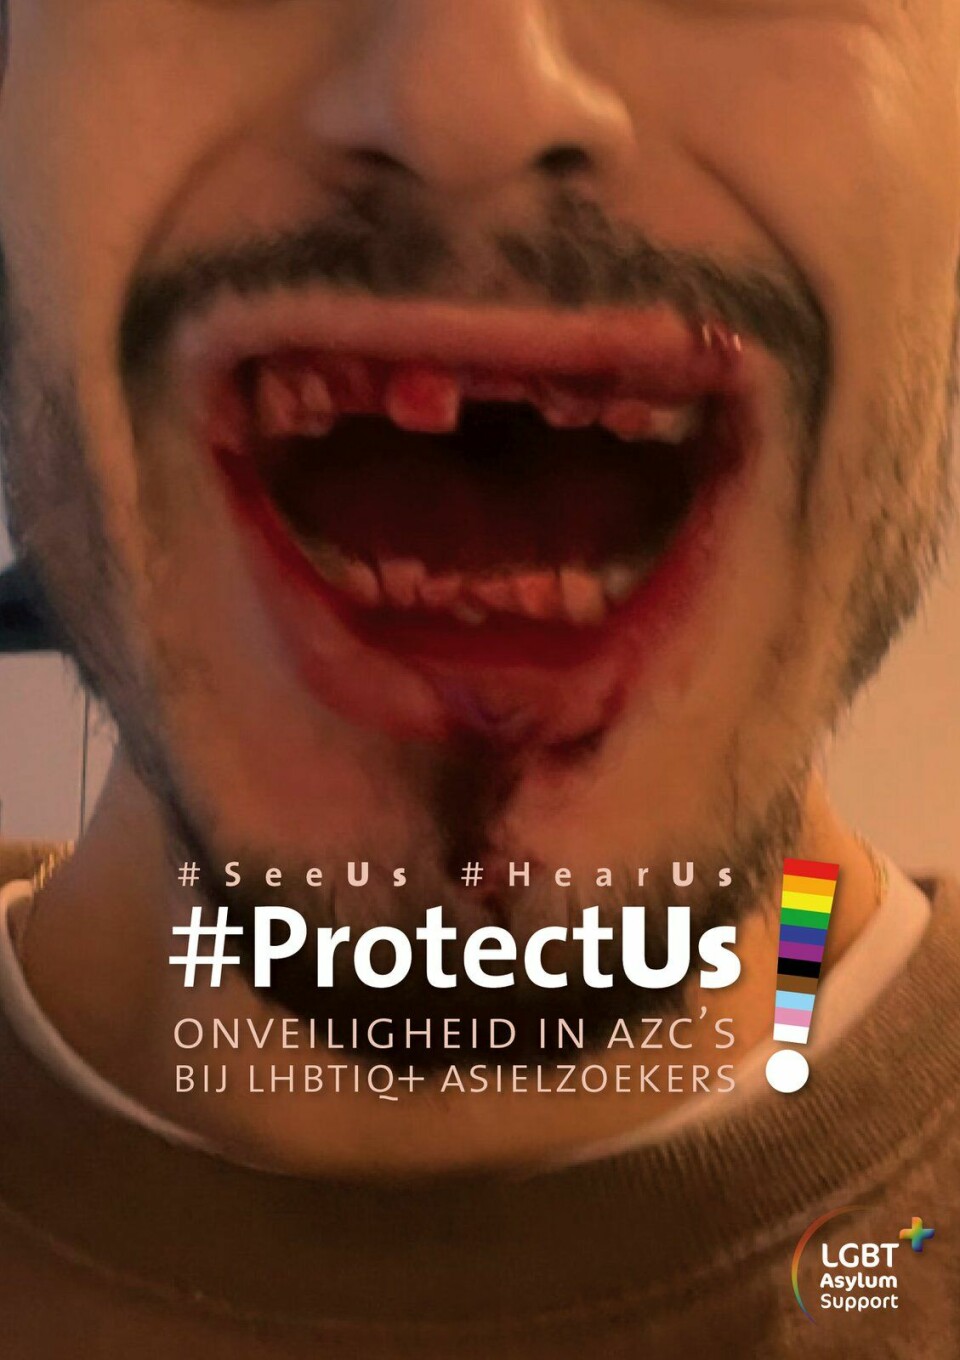 Protect Us